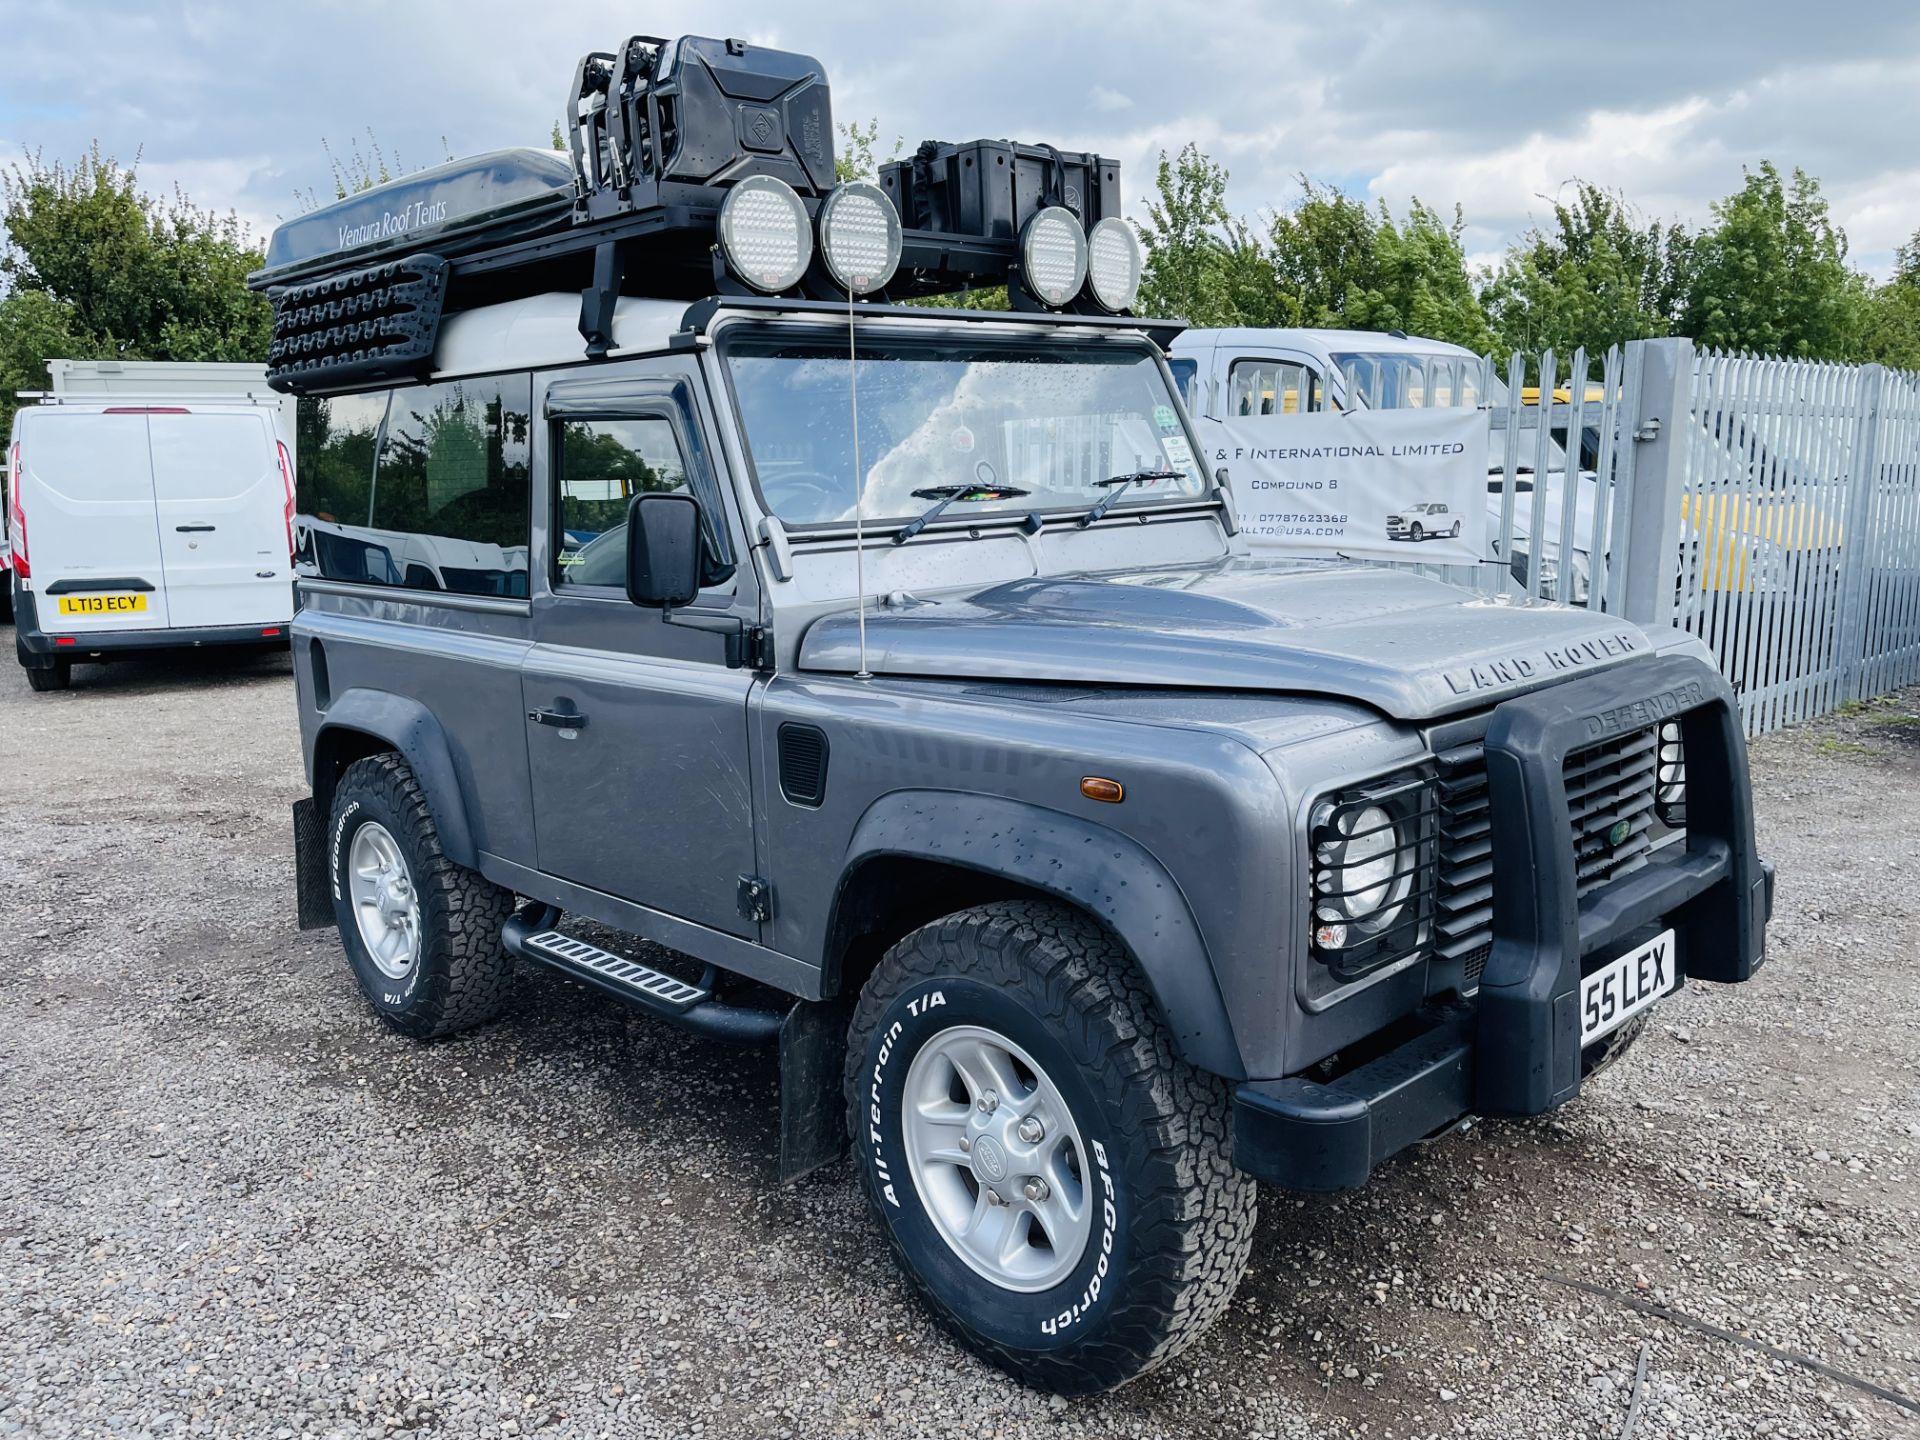 Land Rover Defender 90 Hard Top 2.4 TDCI 2007 '57 Reg' **Expedition Style** 4 Seats 4x4 * - Image 12 of 31